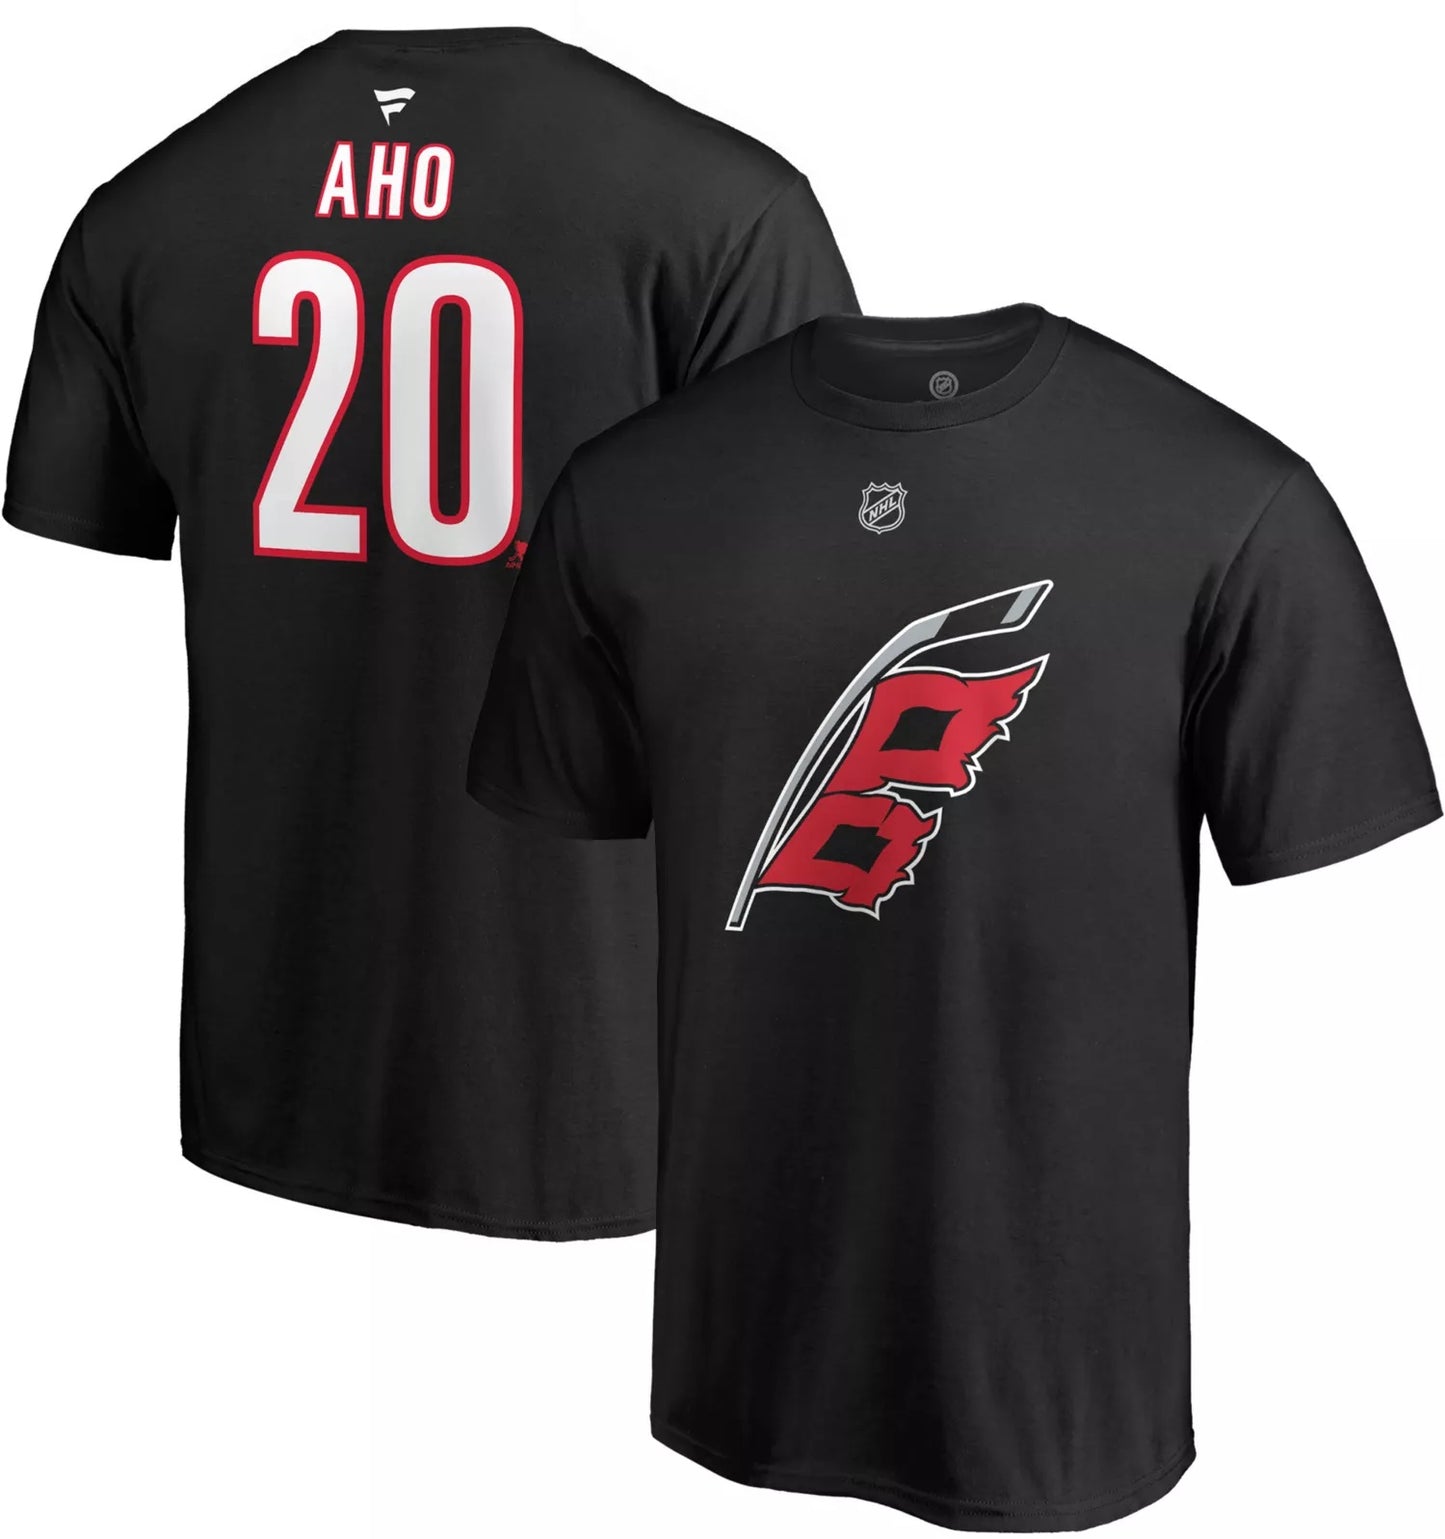 Black tee with Flag logo on front and Aho #20 with fanatics logo on back